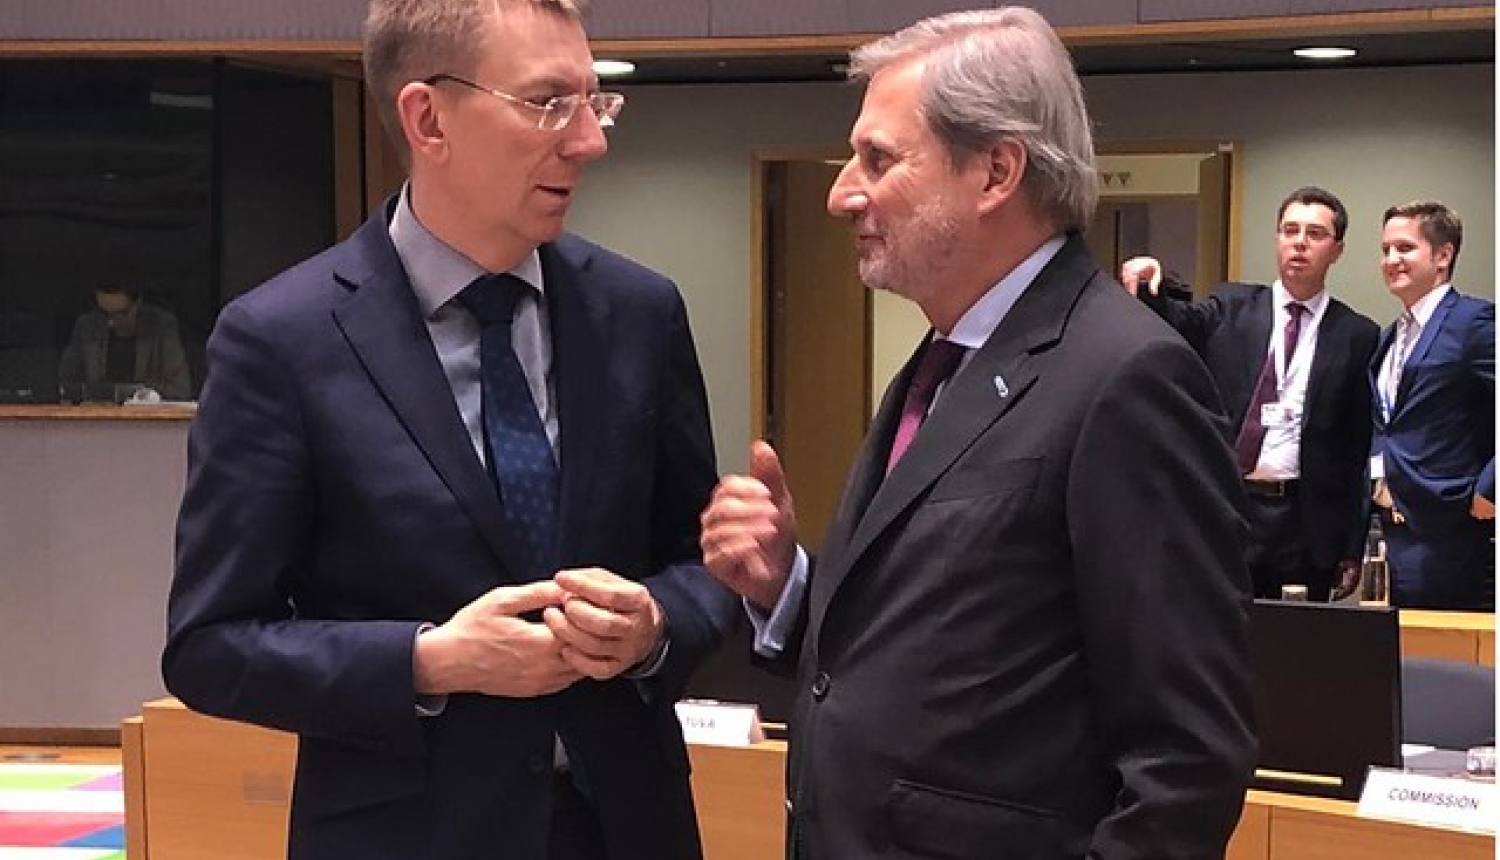 Edgars Rinkēvičs: In negotiations on the EU Multiannual Financial Framework, we’ll continue fighting for fair cohesion and agricultural policy funding for Latvia